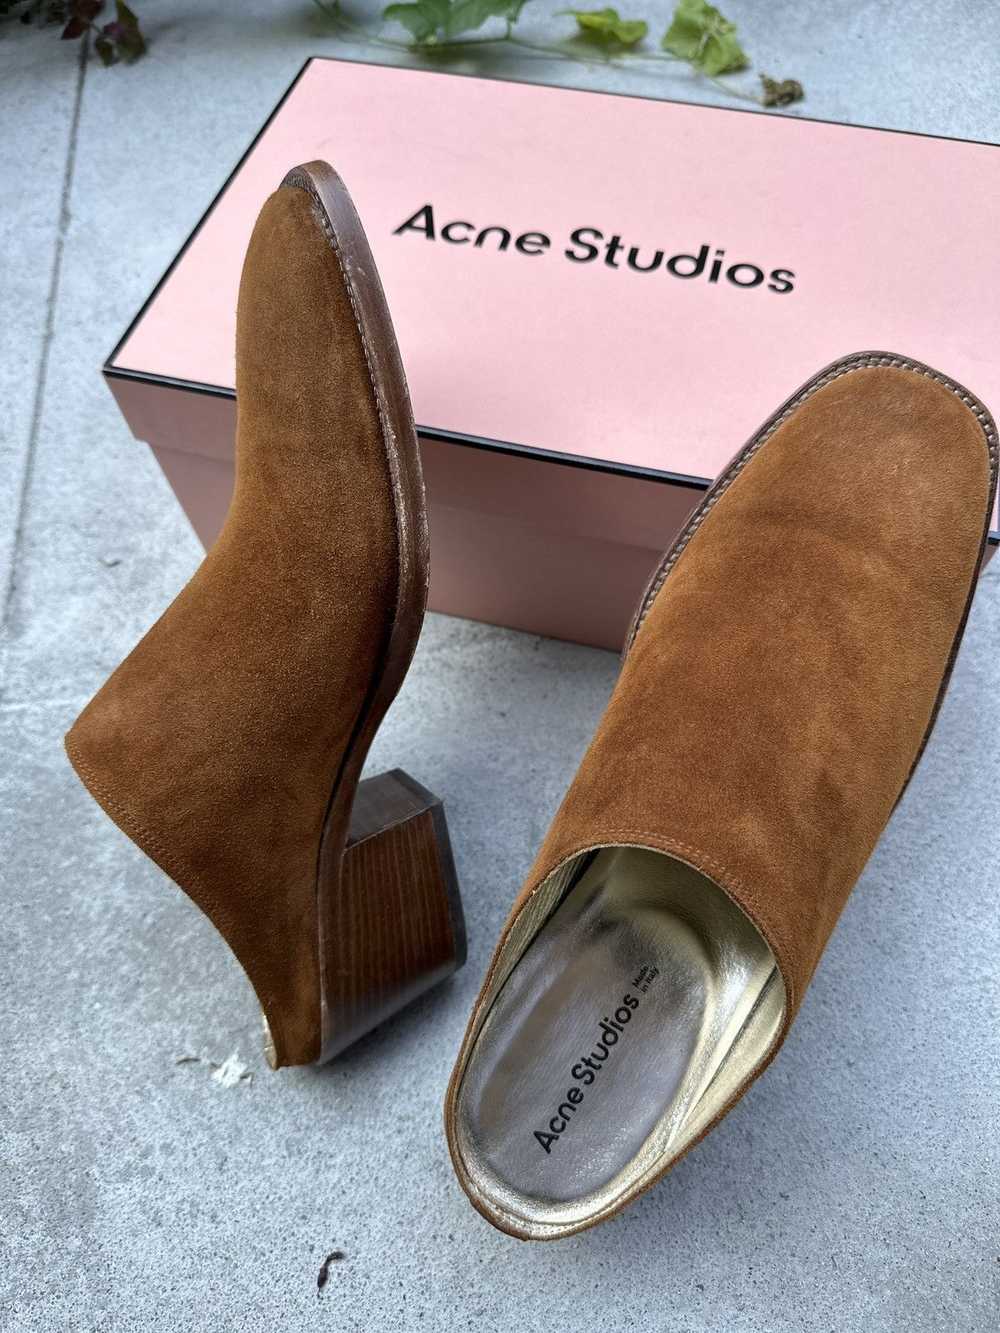 Acne Studios Like a New! Suede Sandal - image 2